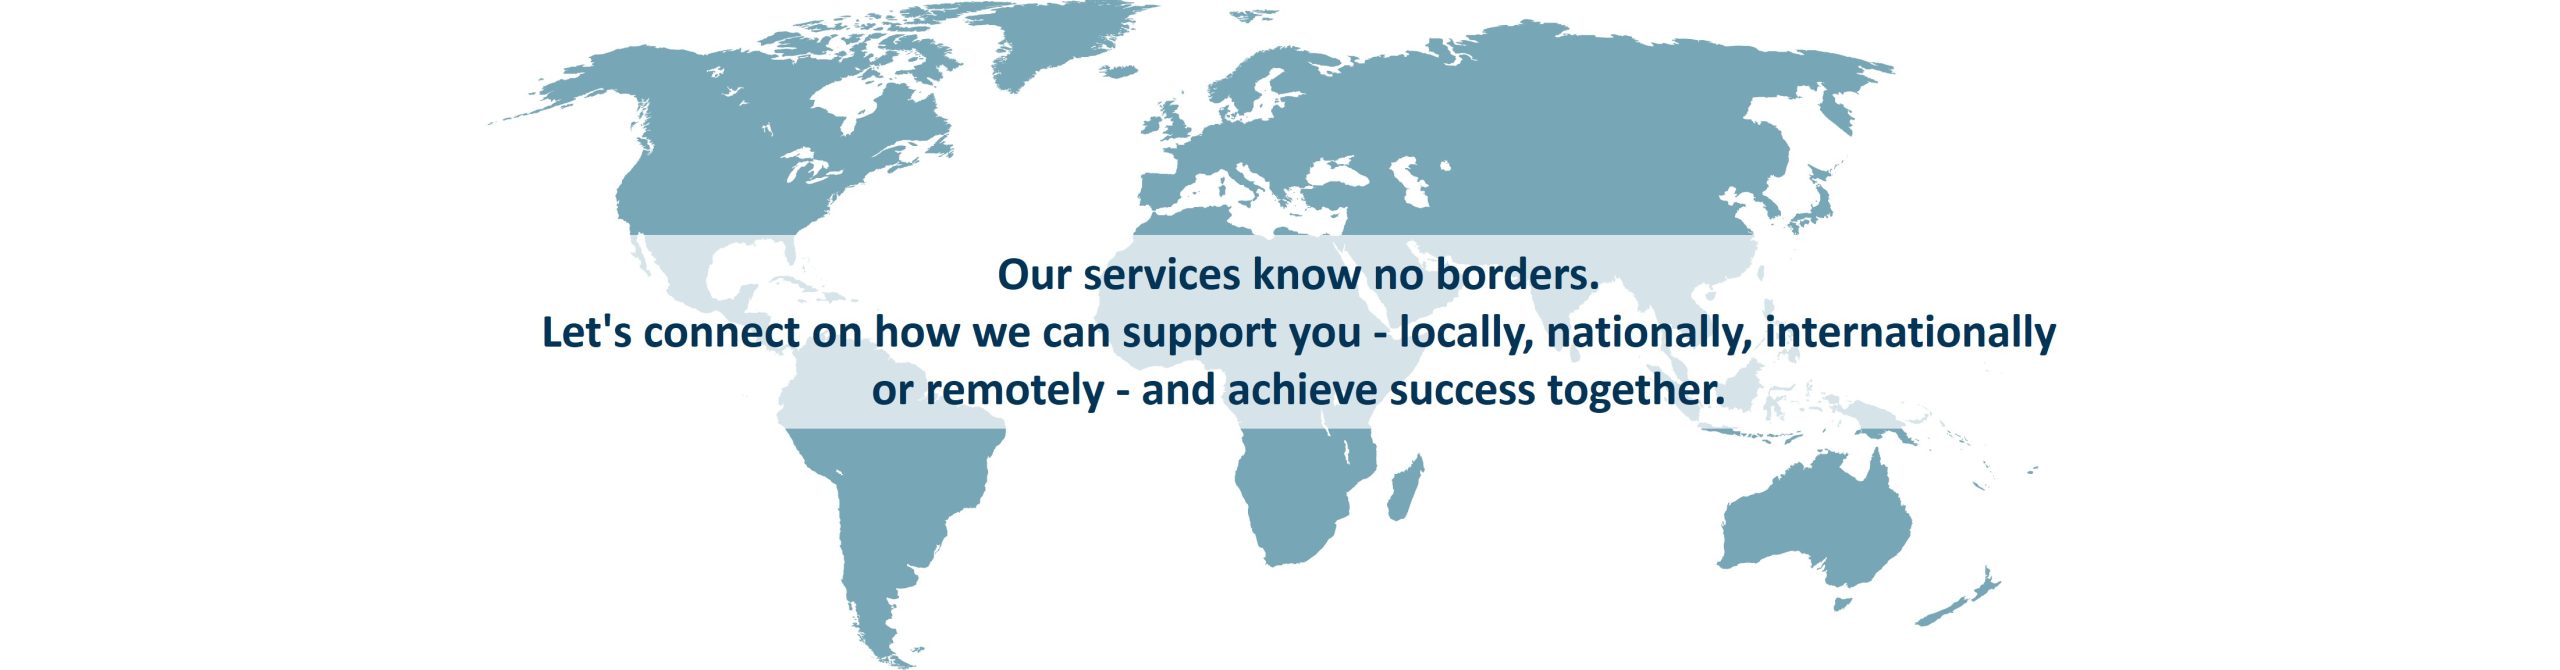 Picture of the map of the word with the text:  Our services know no borders. 
Let's connect on how we can support you - locally, nationally, internationally or remotely - and achieve success together. 
